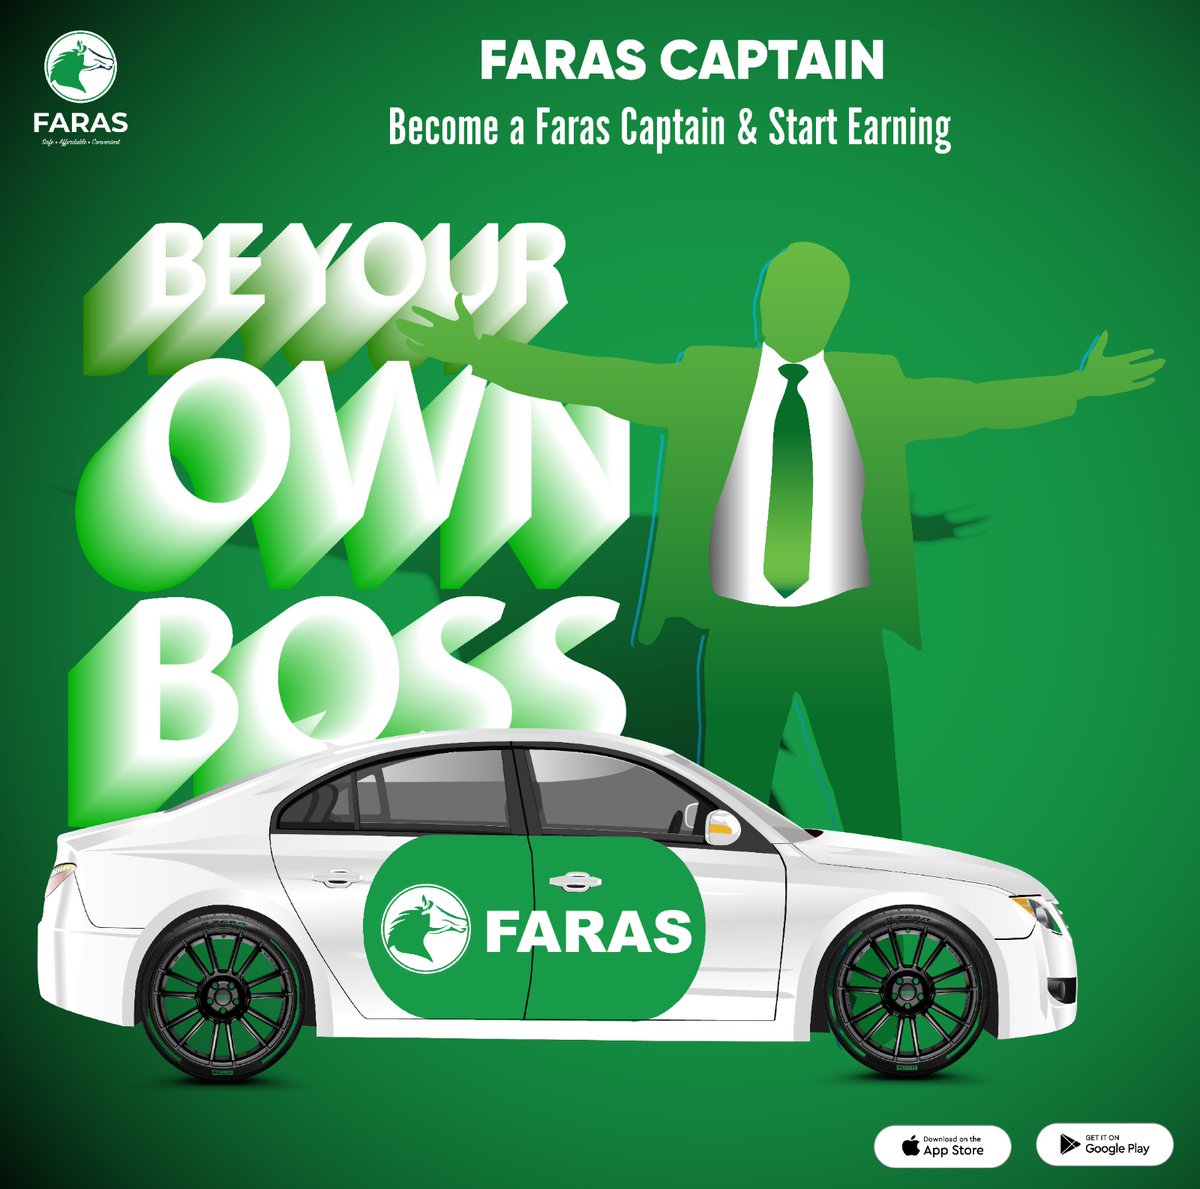 Ready to be your own boss? Become a Faras Captain today and start earning on your own terms and experience the difference. Join a Thriving Community of Faras Captains App Now faras.link/FarasCaptains. & Earn Top Rates. #DriveWithFaras #BeYourOwnBoss #FarasFamily #JoinTheCrew